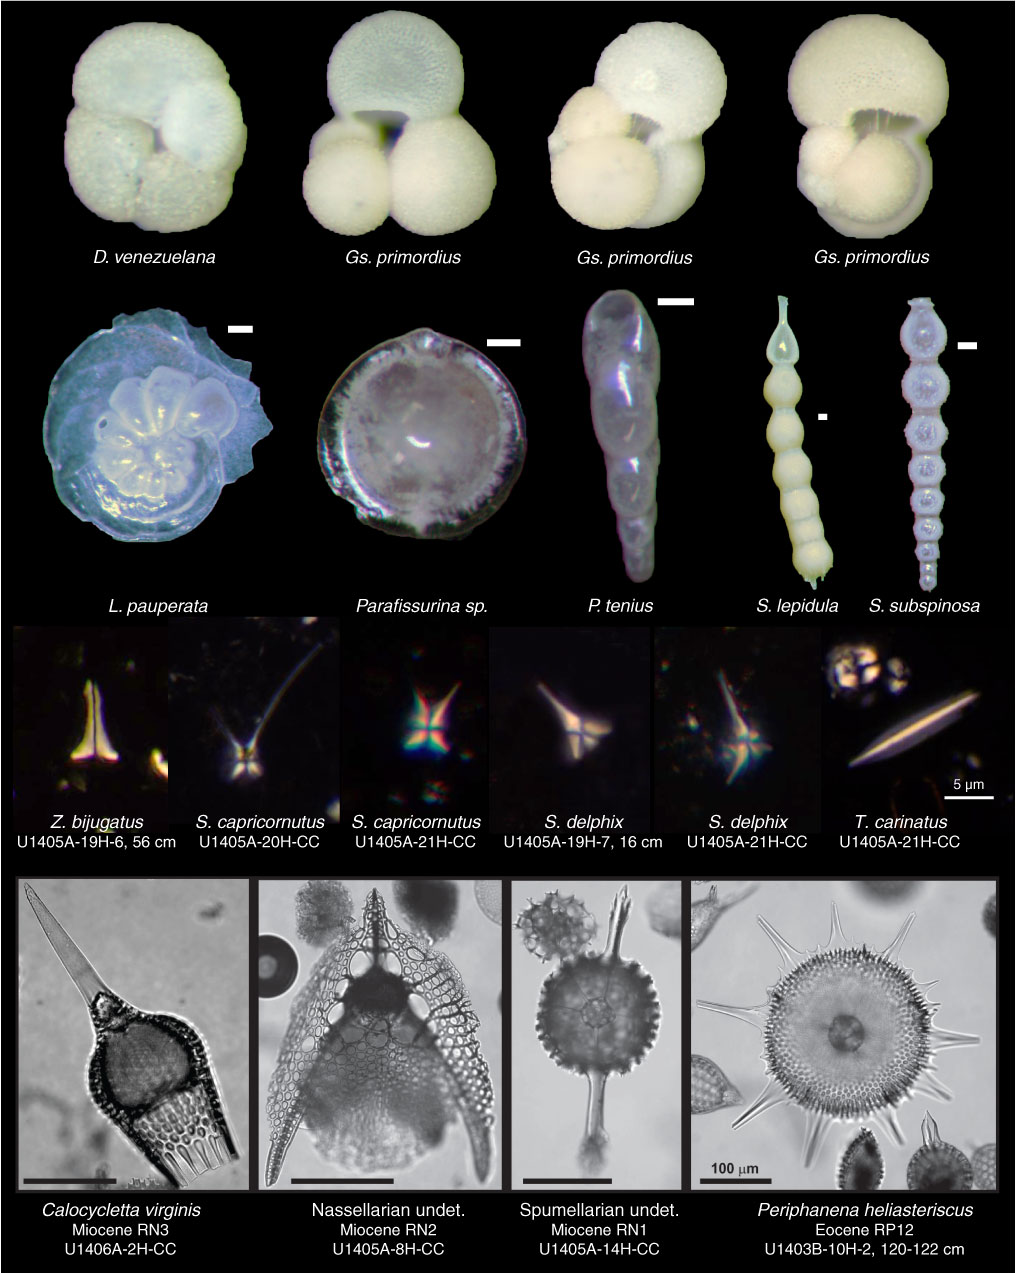 Images of preserved microfossils from the sites